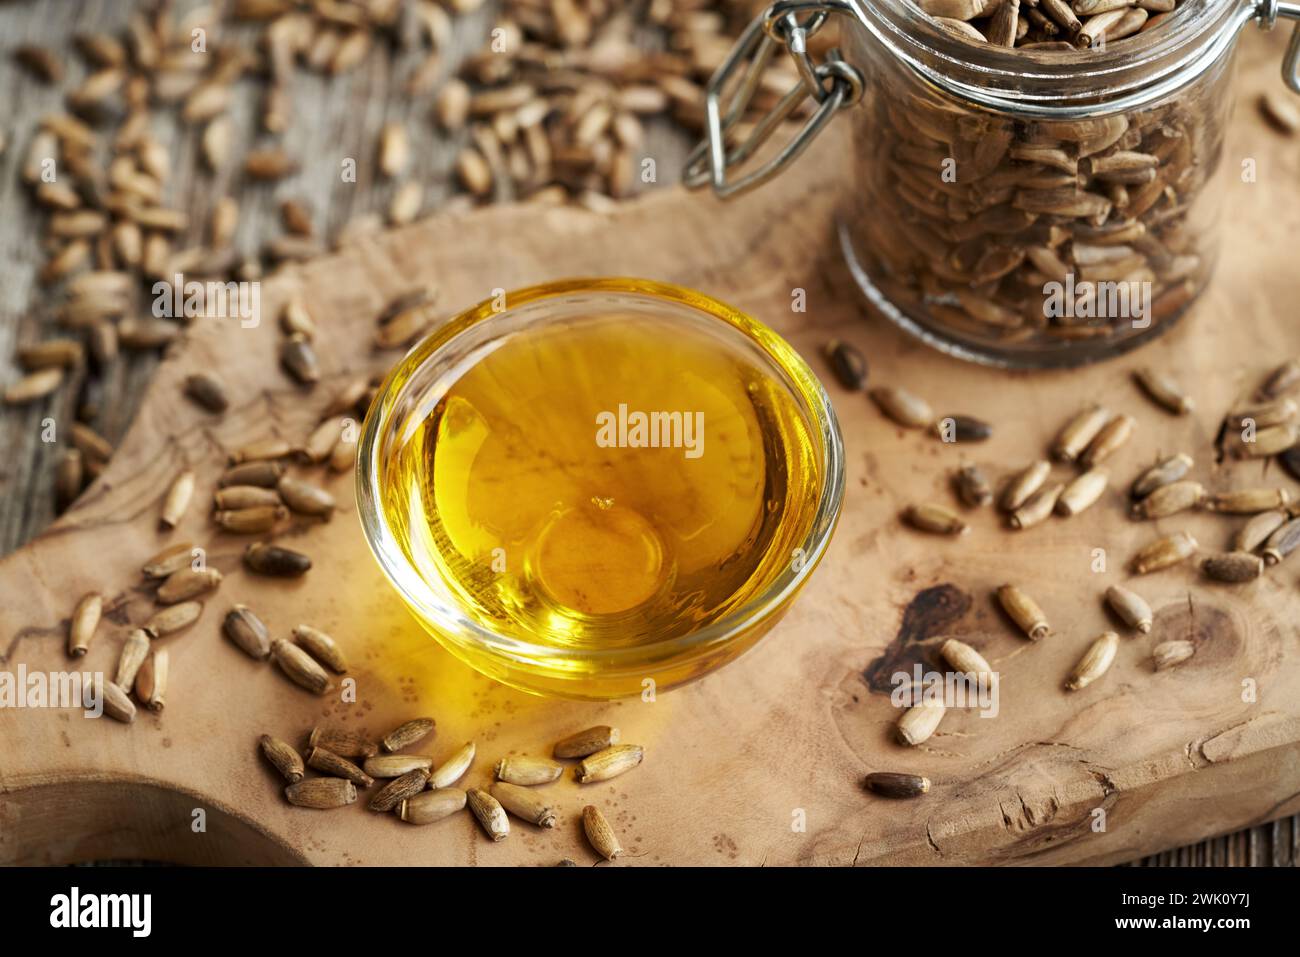 Milk thistle oil in a glass bowl, with Carduus marianus seeds in the background Stock Photo